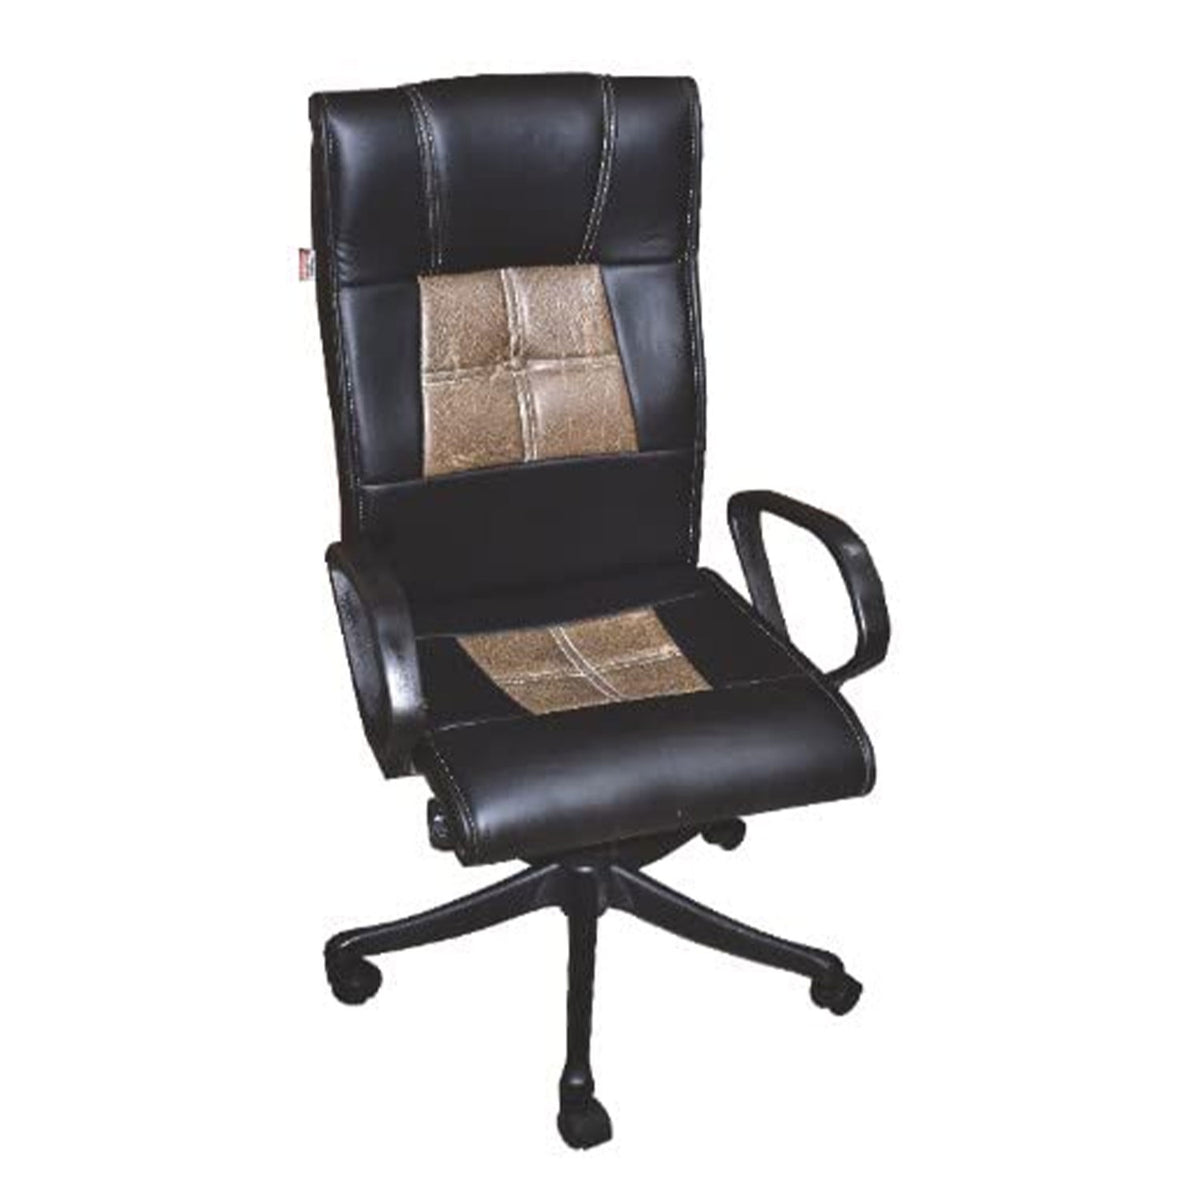 SmileSellers HIGH Back Cushion Office Managers Chair LEATHERETTTE Material and Super Comfy HIGH Back Black Color